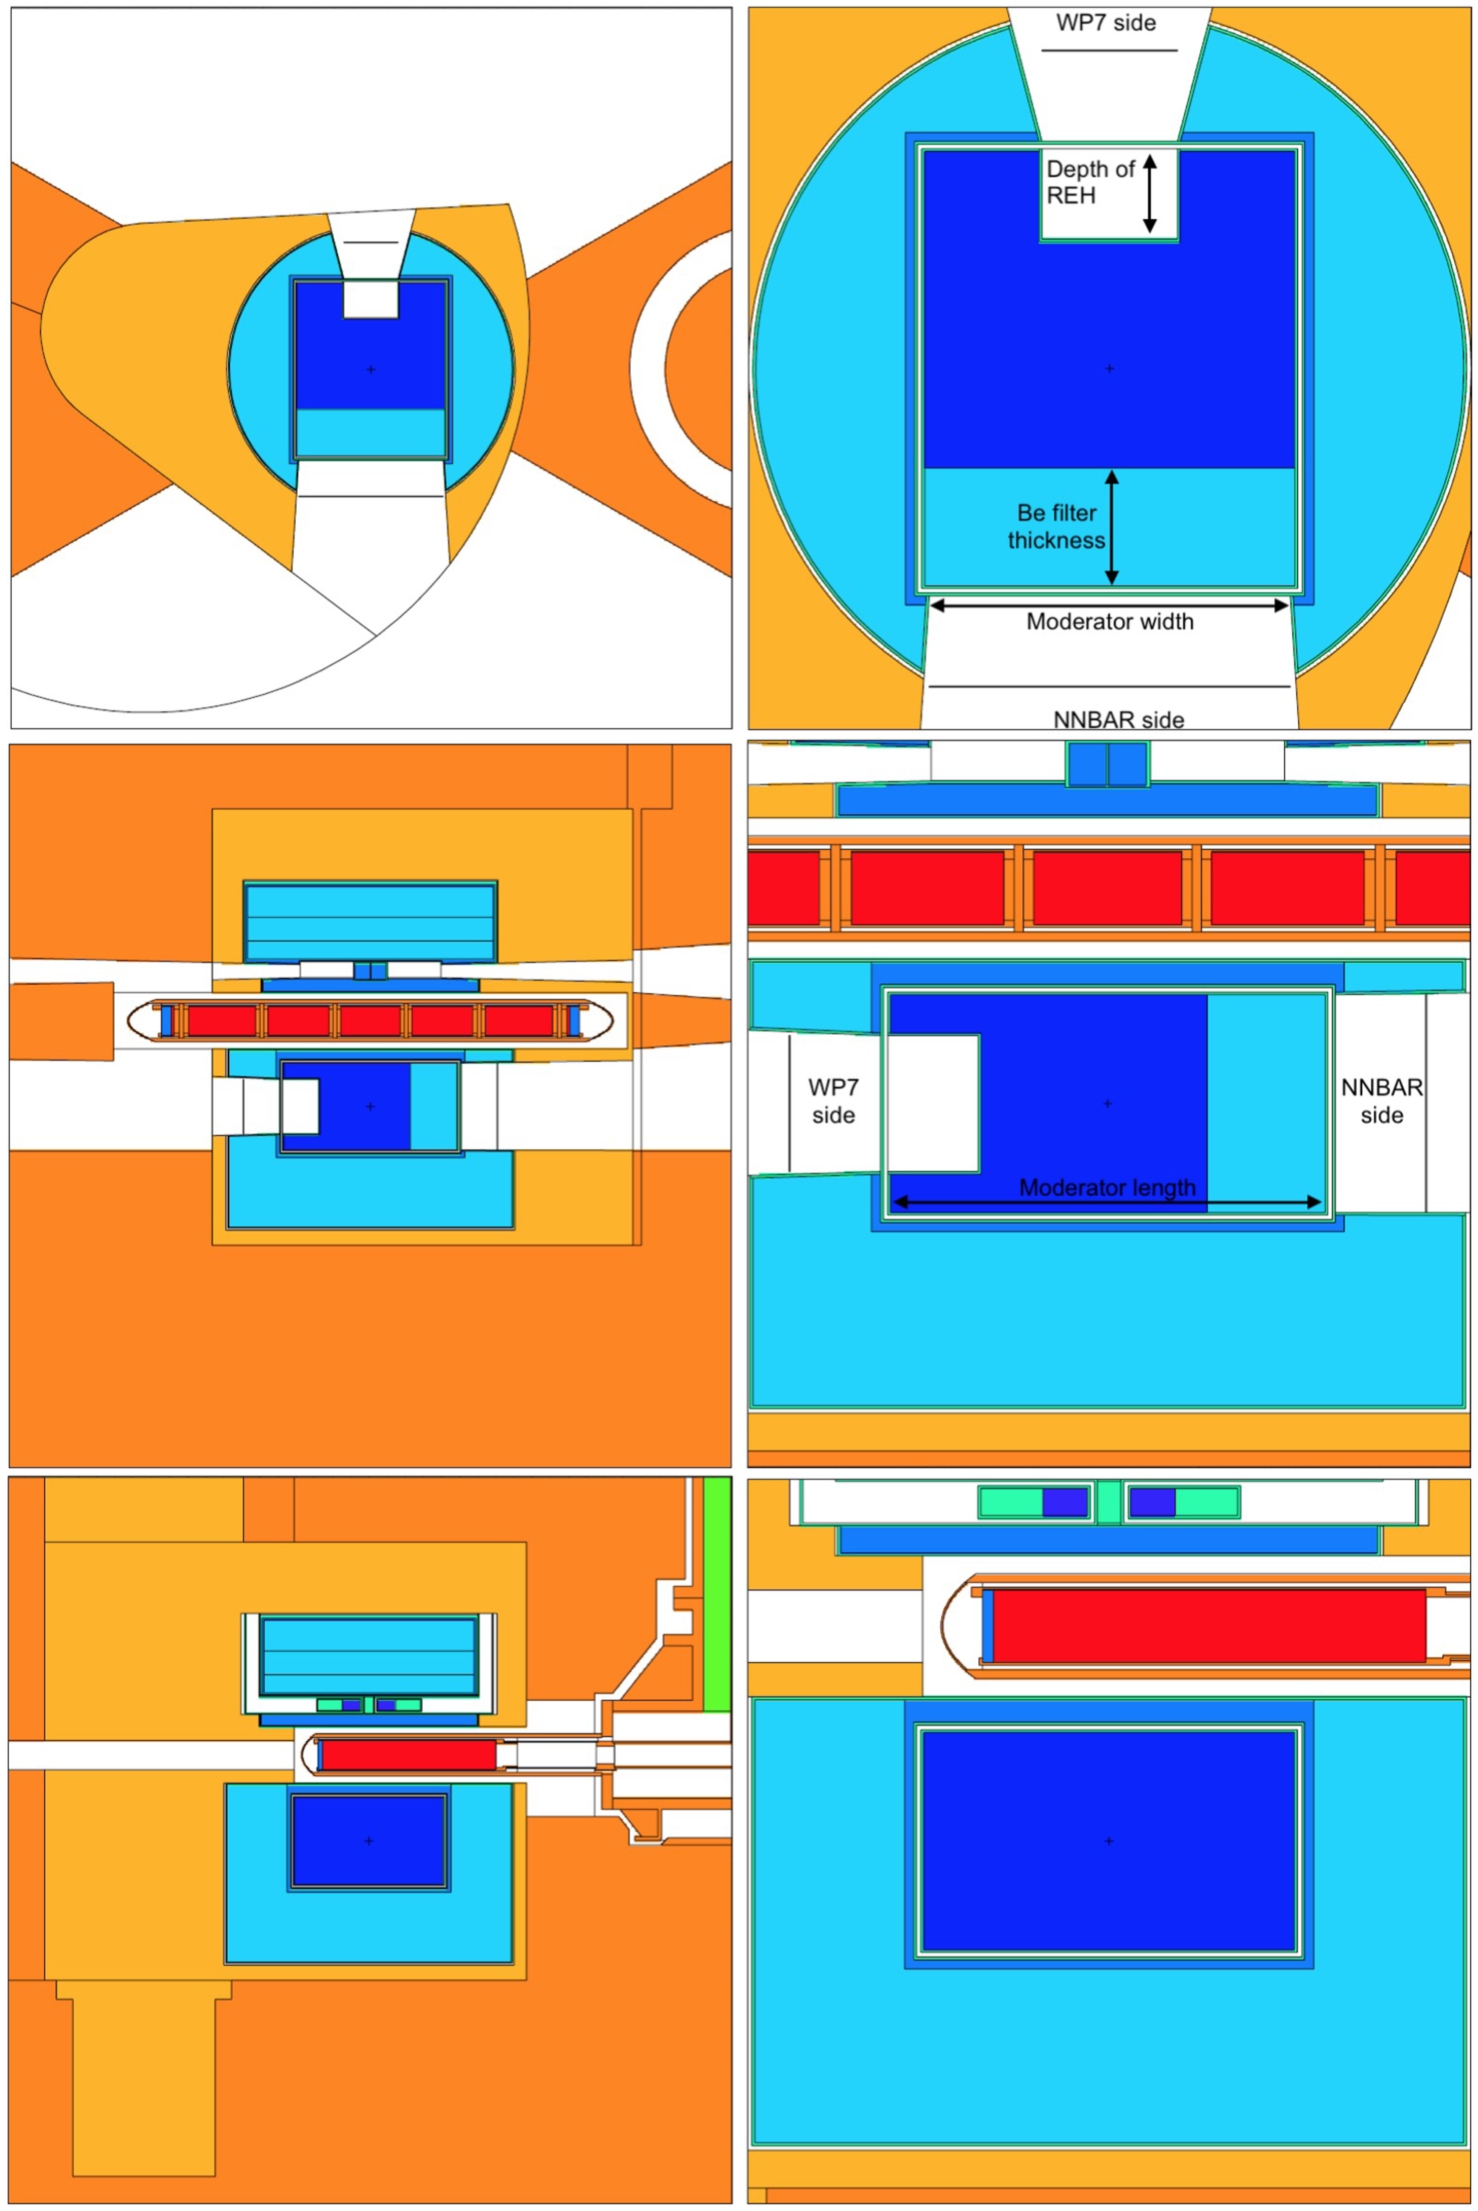 Graphical representation of the design for the LD2 moderator after the third iteration. The color codes are the following: orange: steel (twister frame, inner shielding, etc); dark blue: liquid ortho-deuterium; blue: light water; light blue: beryllium; green: aluminum. Note that cold Be filters and ambient Be reflector are shown using the same color; the same note applies to Al.